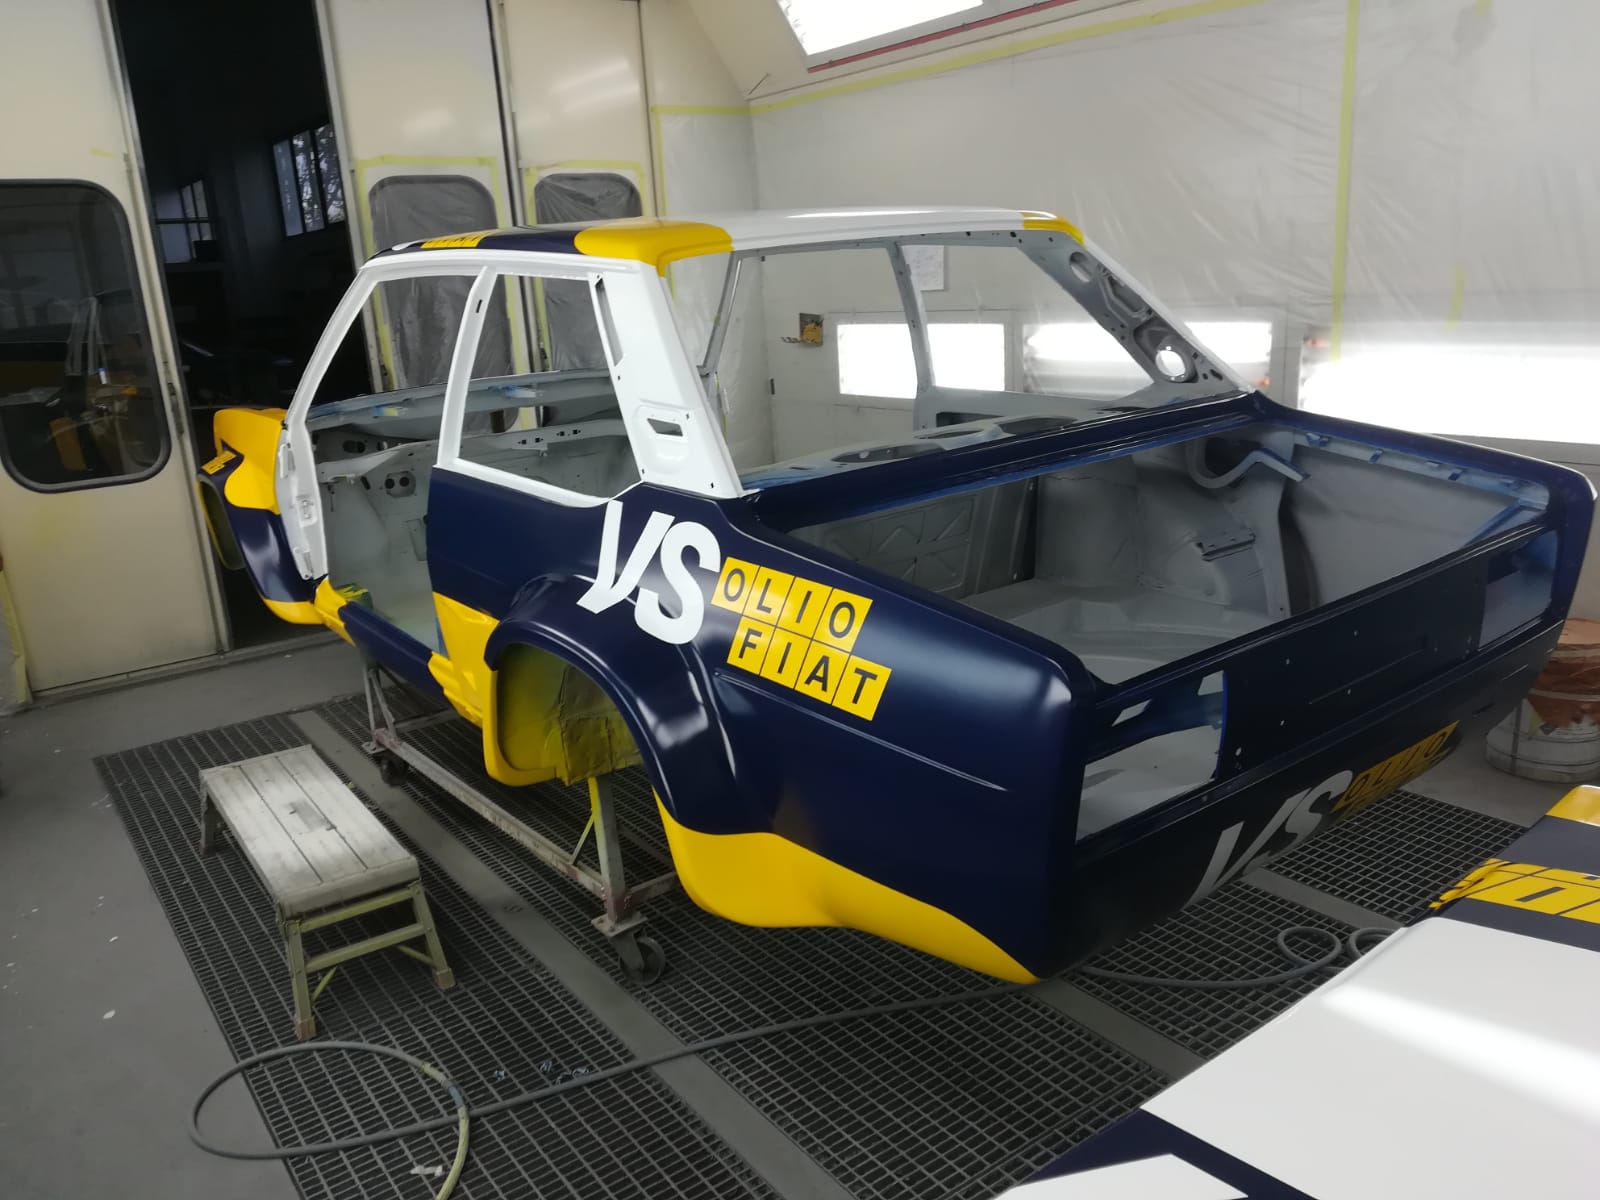 Fiat 131 Abarth Gr.4 VS oliofiat Painted Livery